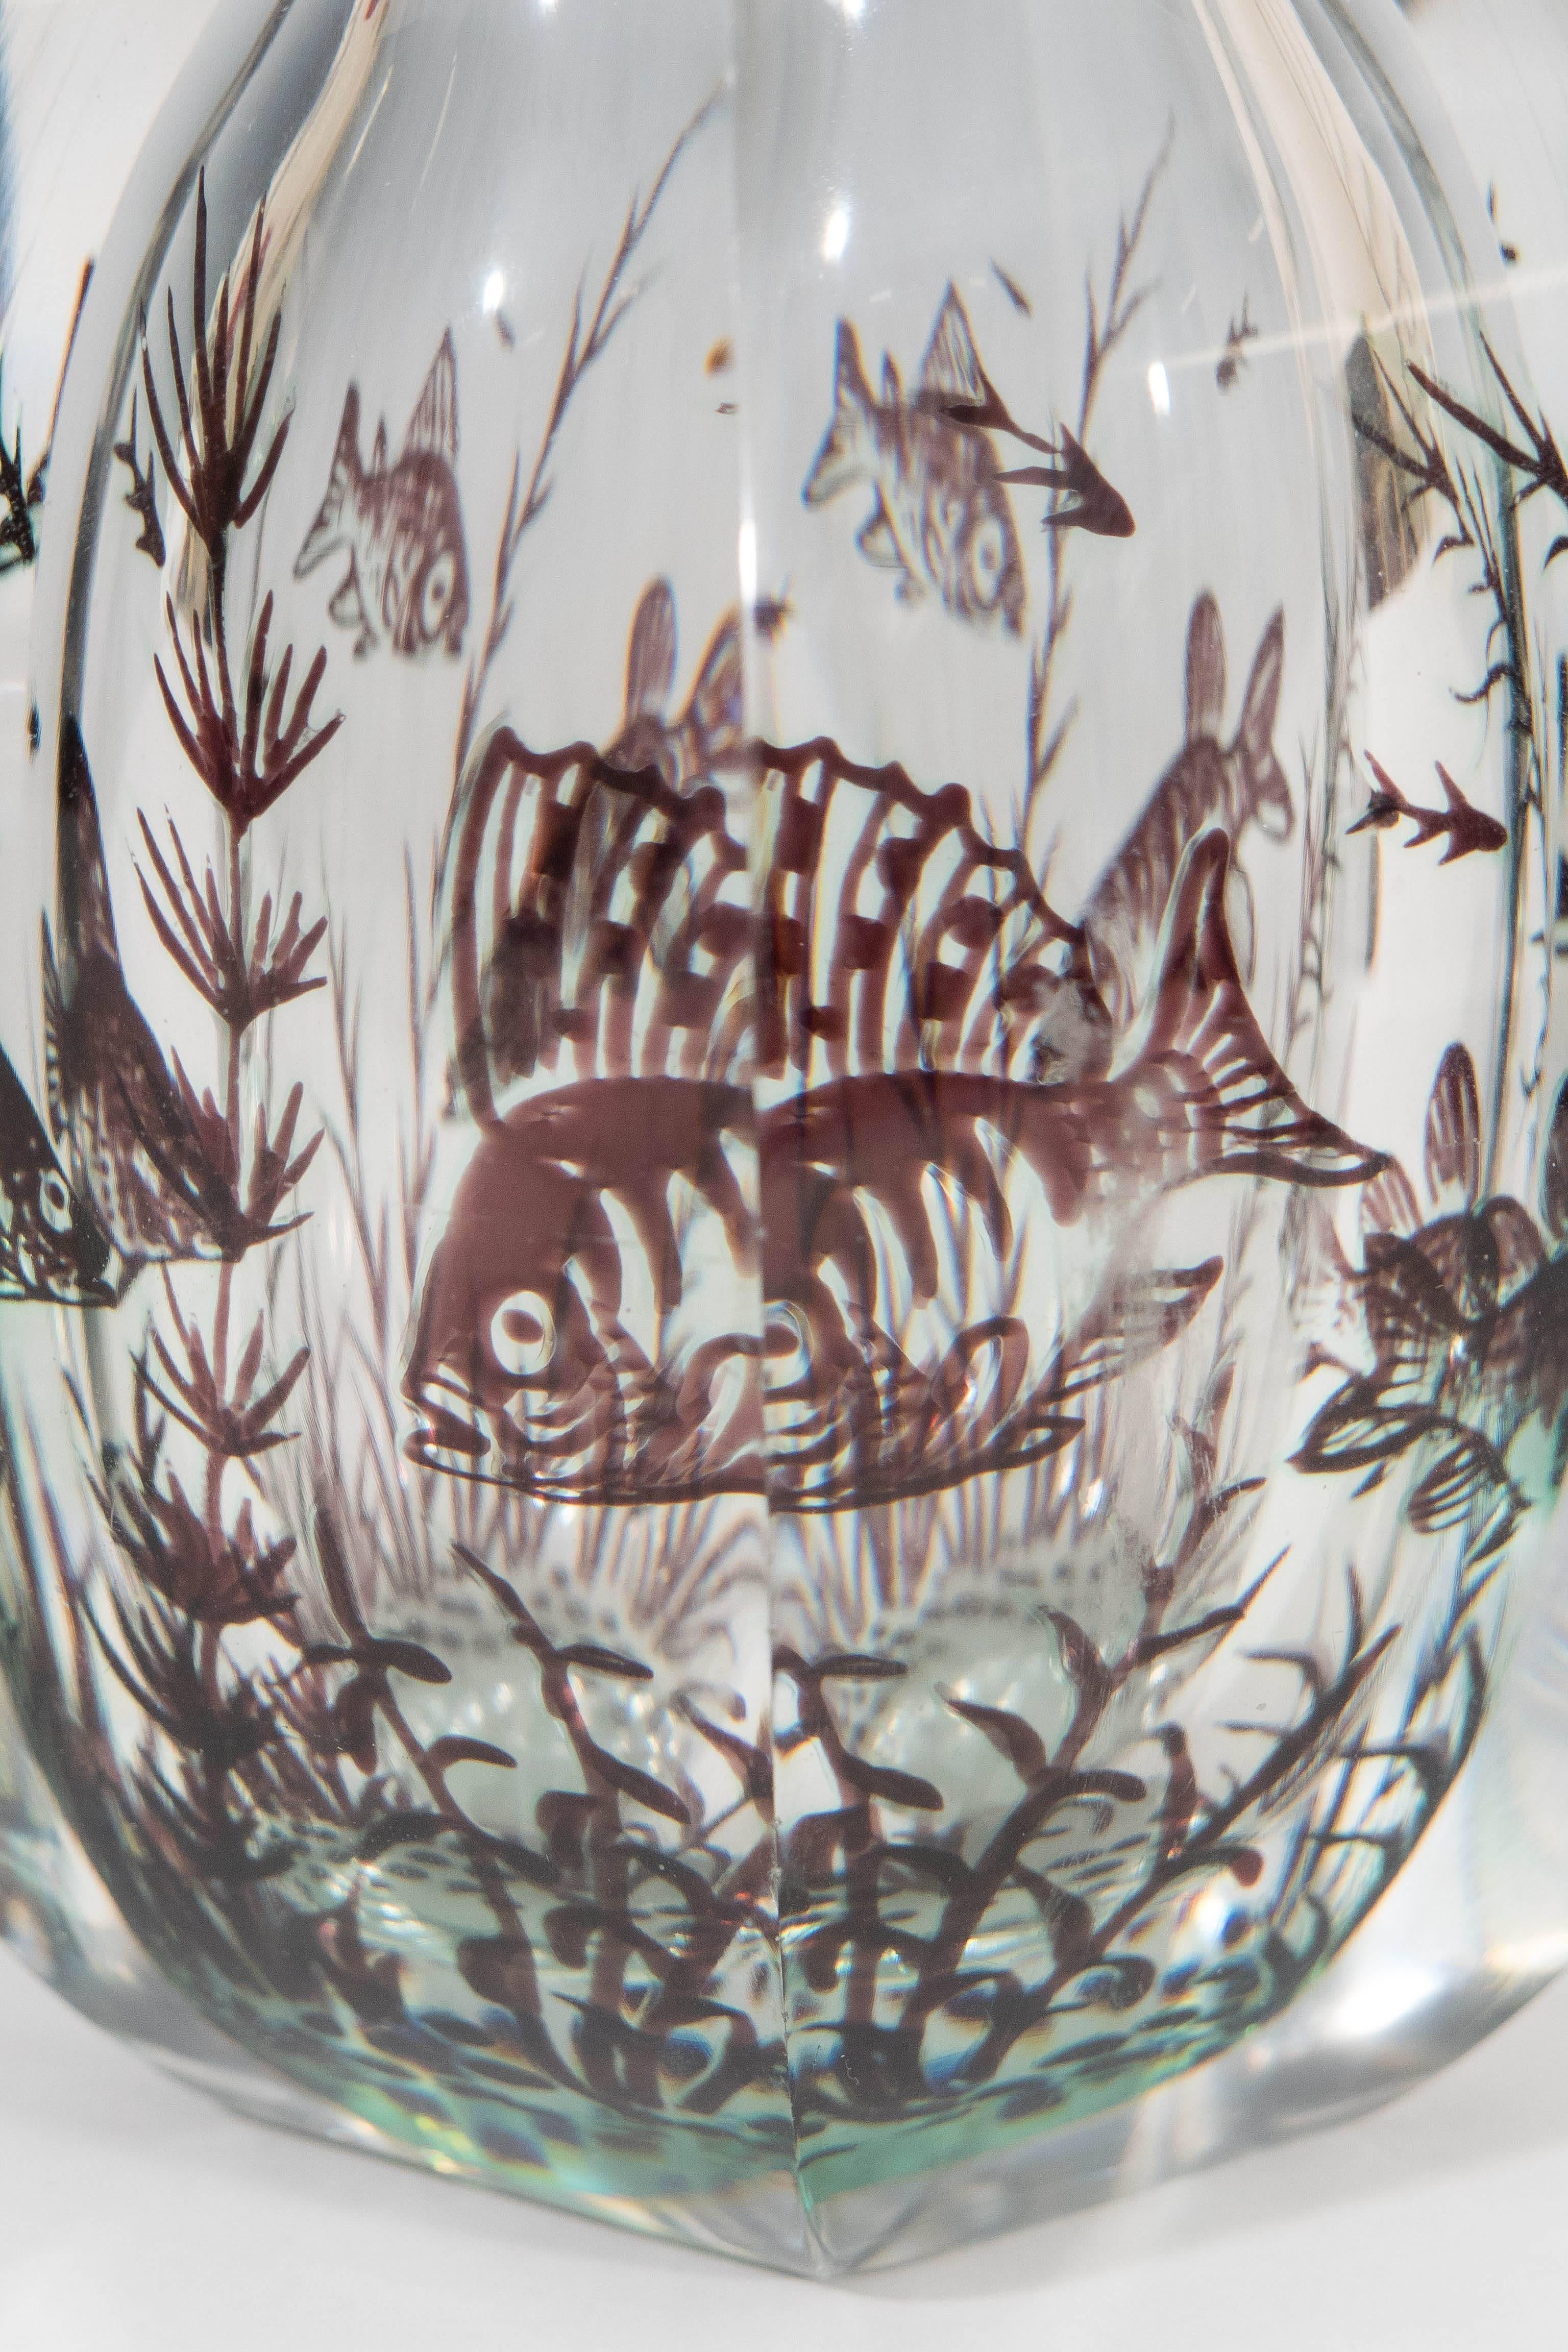 A thick, six-sided glass vase, produced circa 1950s-1960s by artist Edward Hald for Orrefors of Sweden, rendered using 'graal' technique (twice-blown), depicting seaweed and fish floating amidst crystal clear glass. Markings include